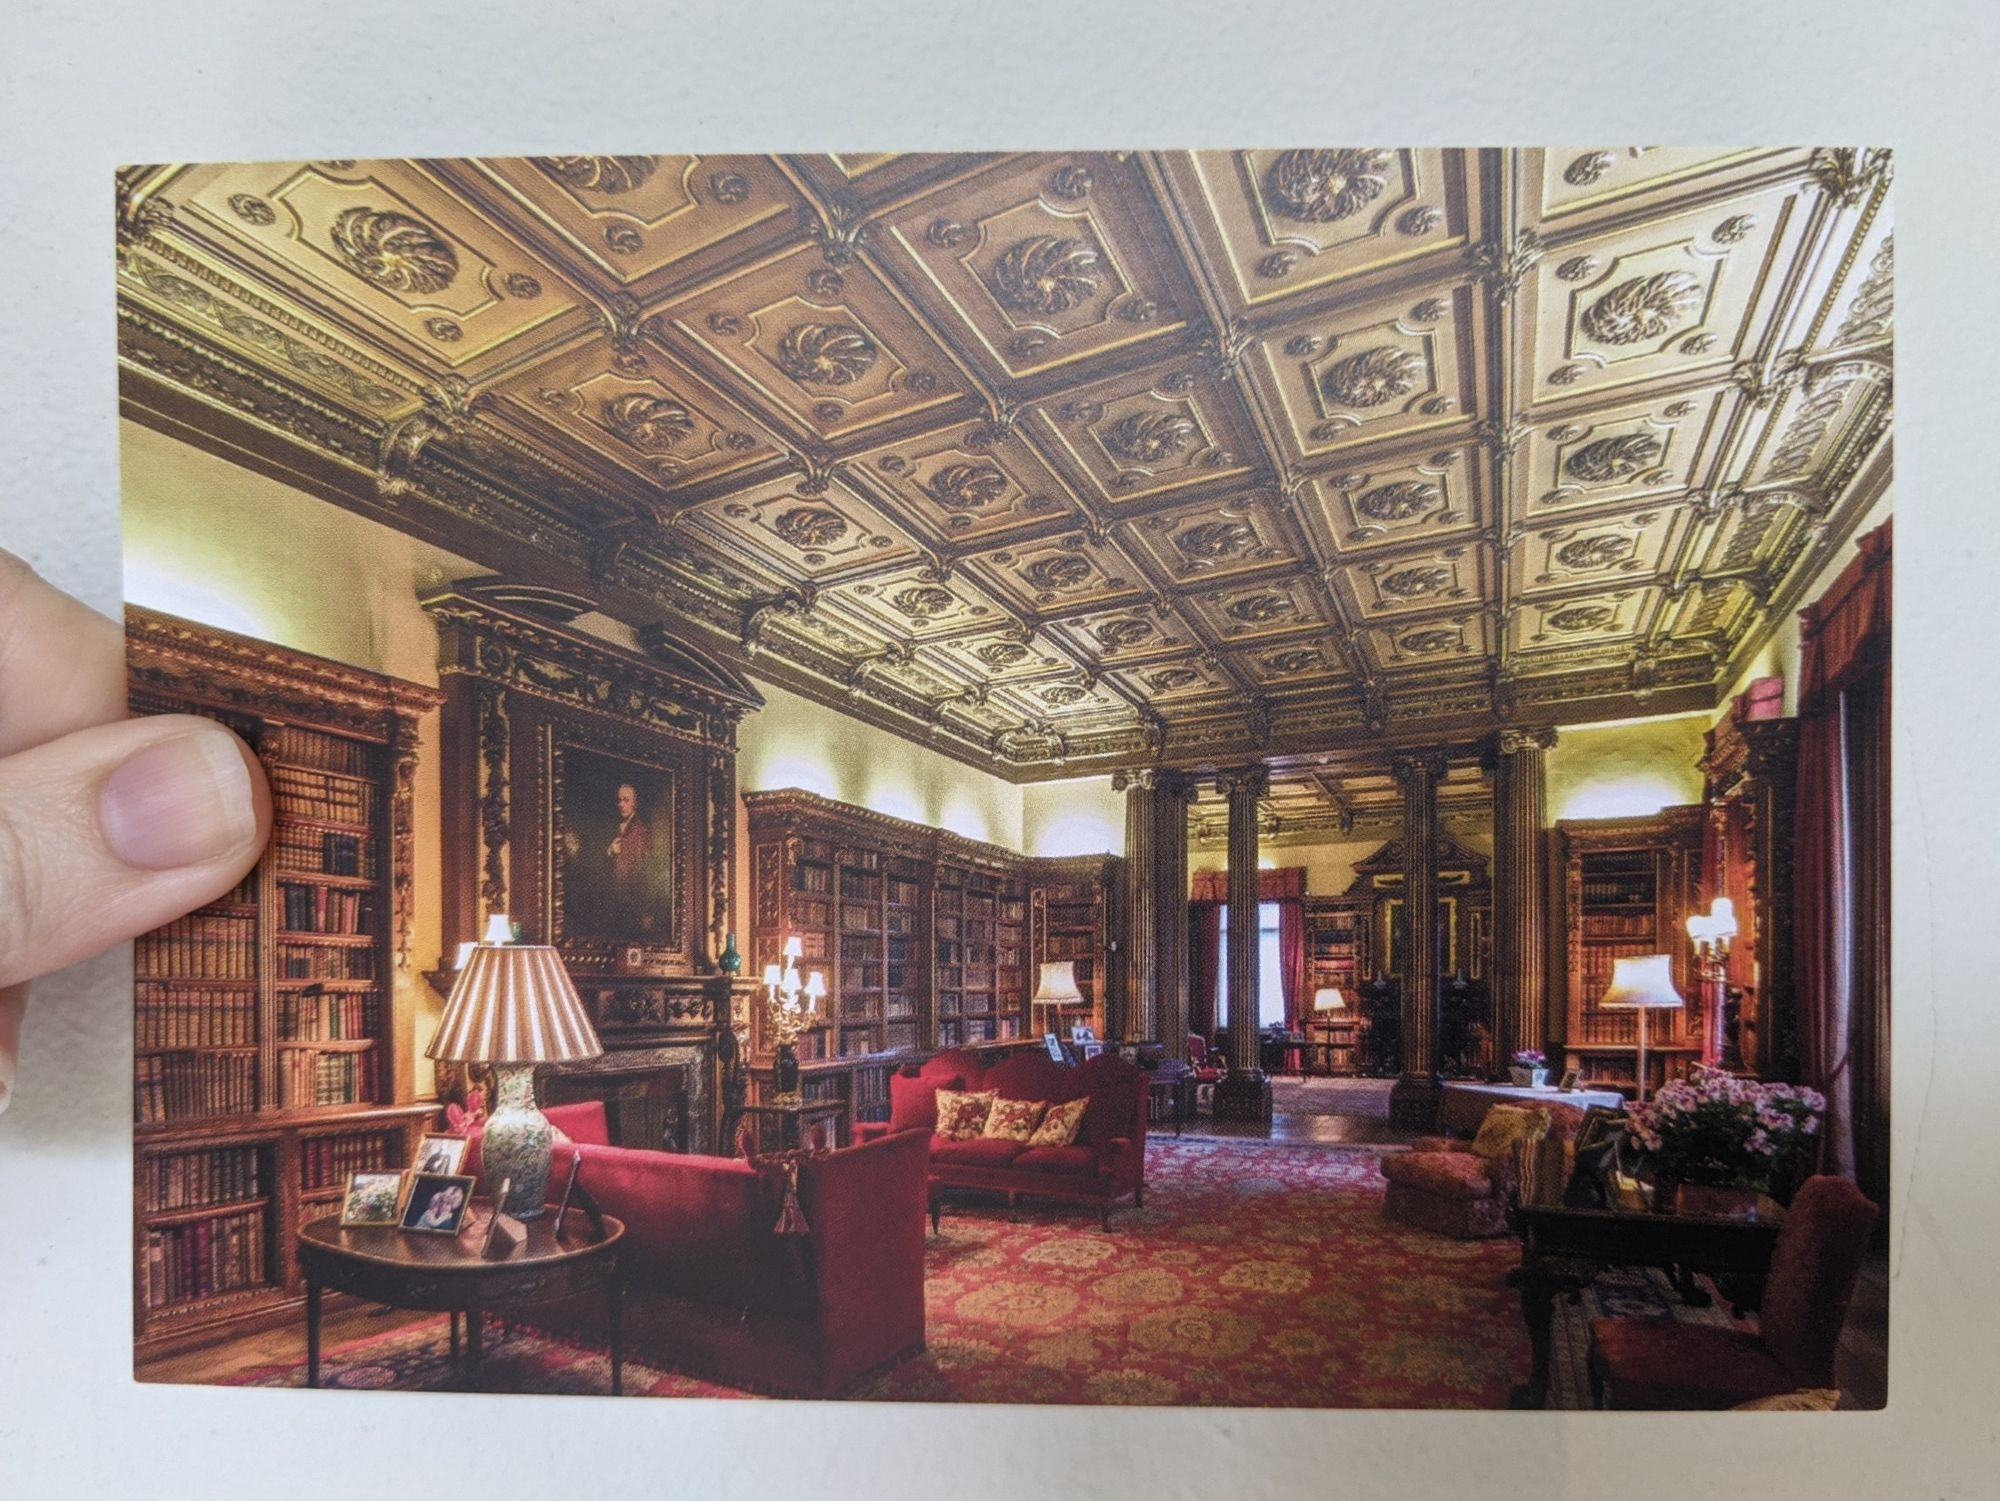 Period Pieces and Portraiture: Highclere Castle